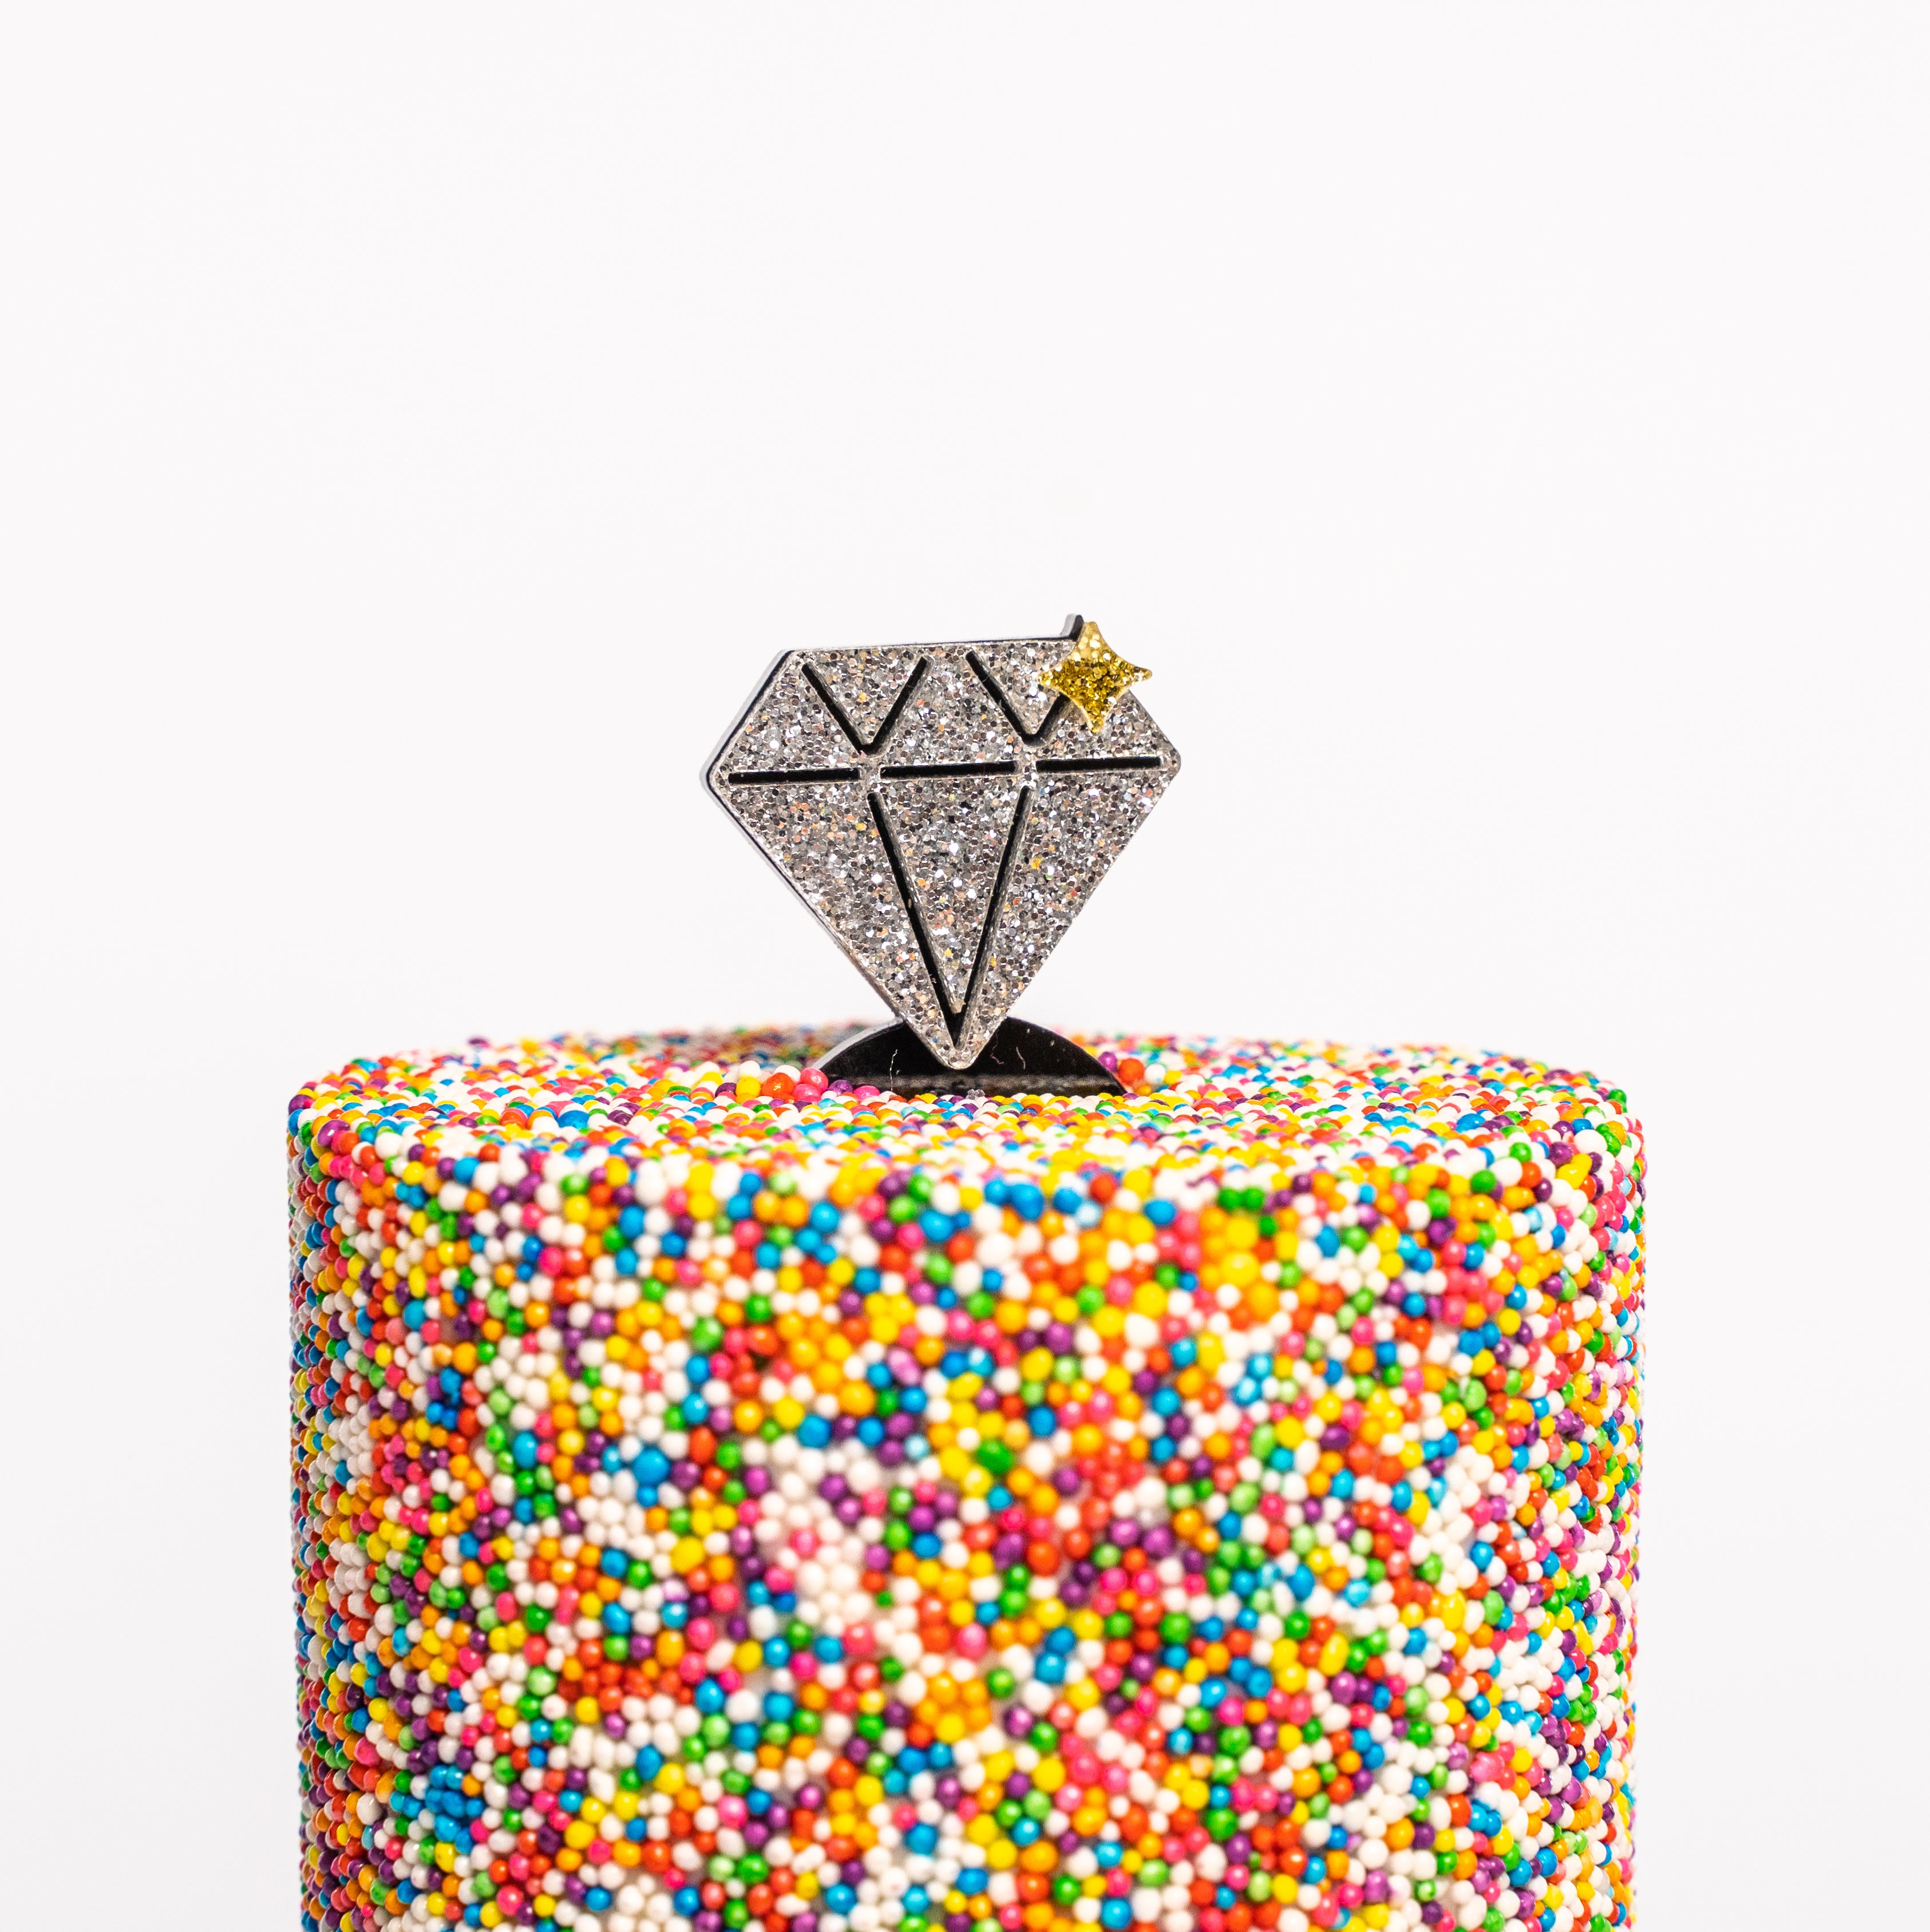 The Making of a Diamond Patterned Cake with a Dramatic Bow – Grated Nutmeg